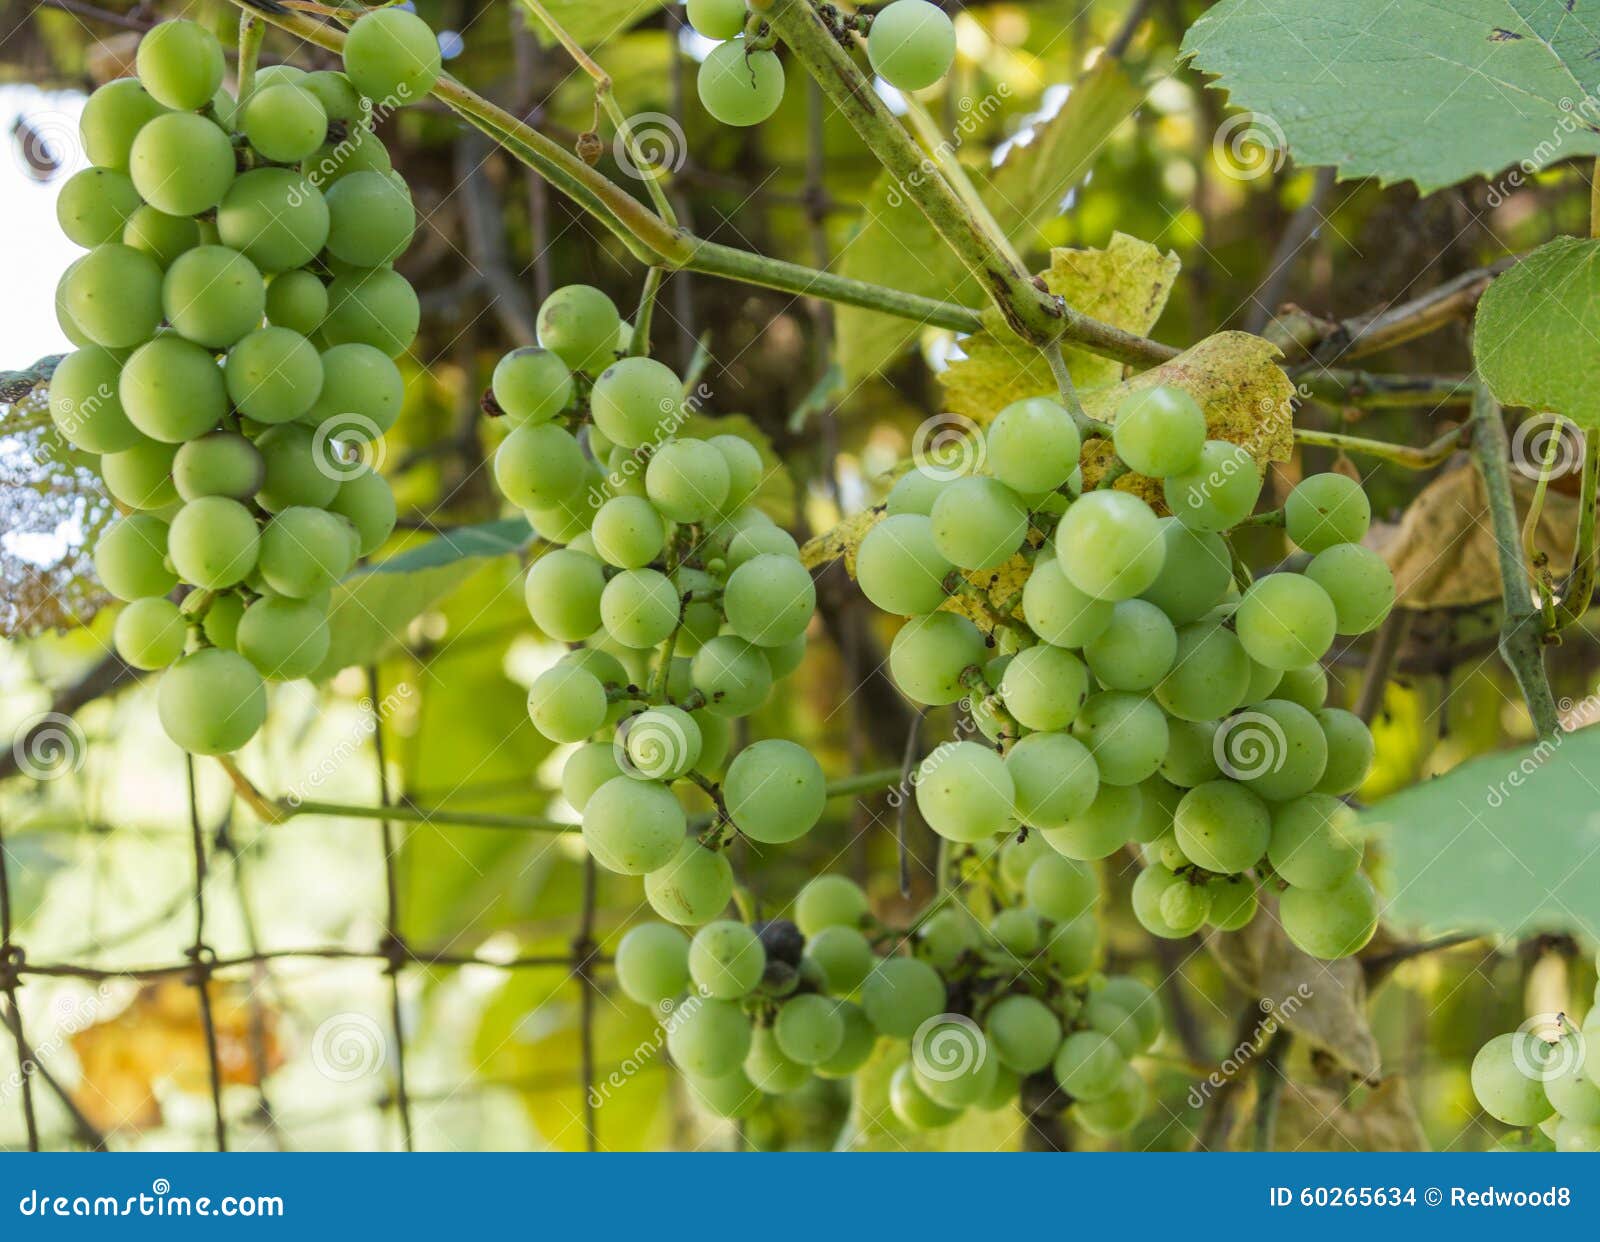 clusters of green grapes